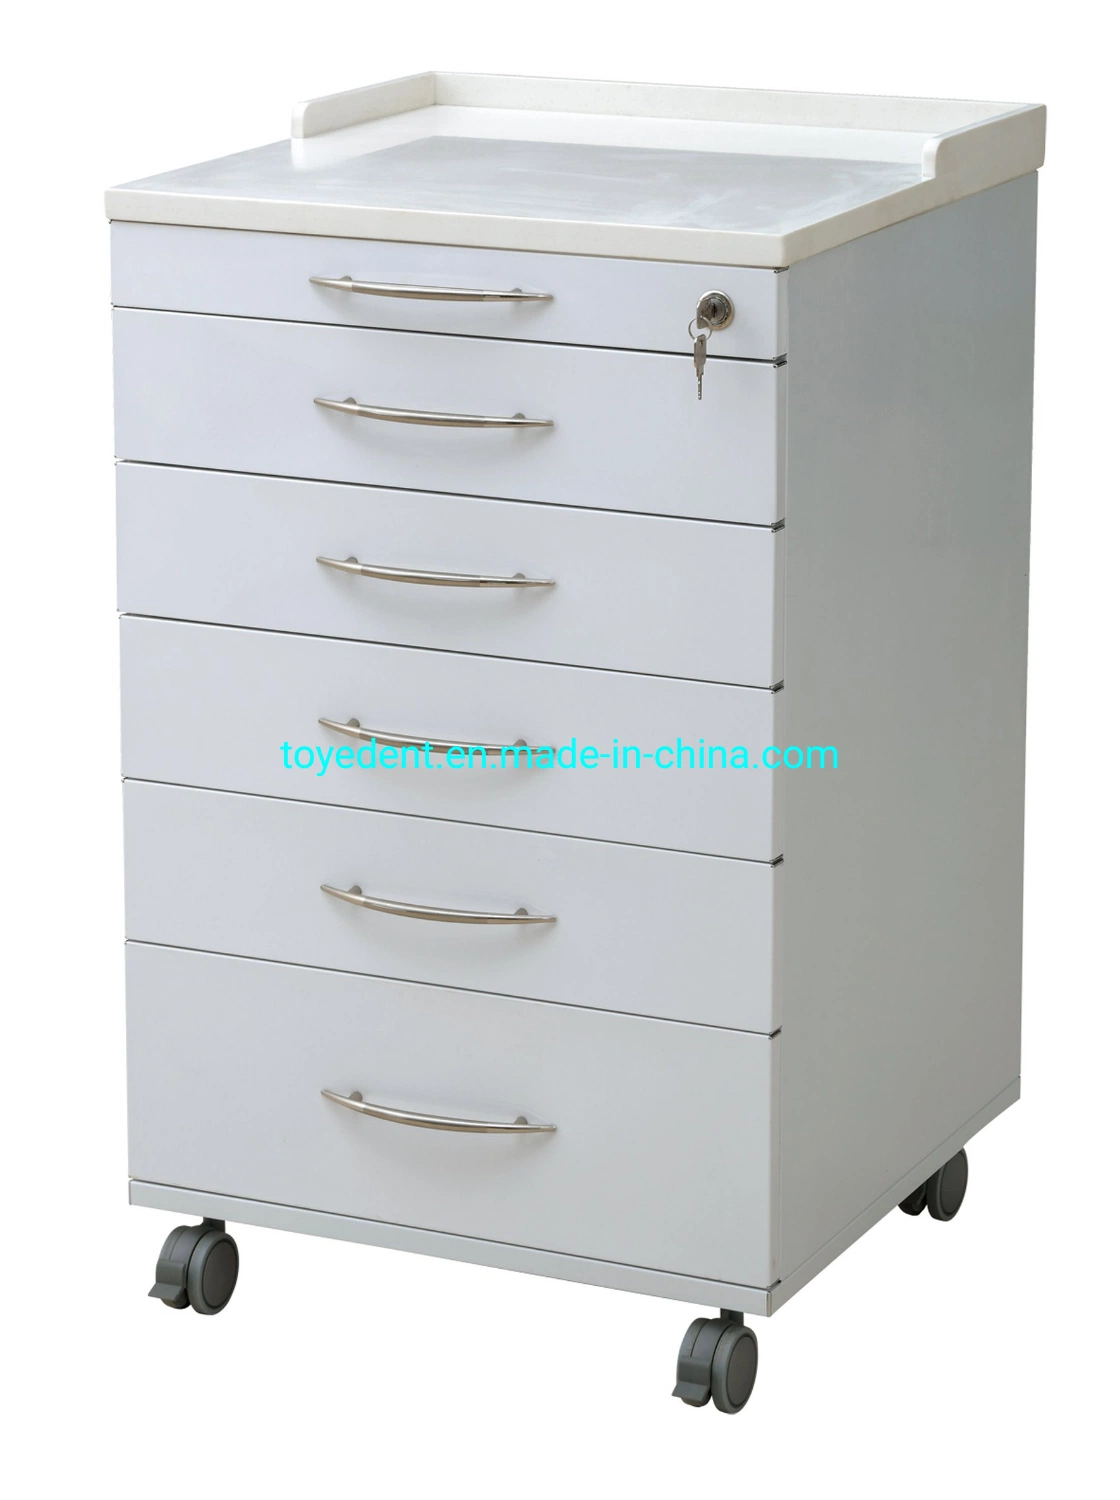 Top Quality Stainless Steel Dental Furniture Cabinet Clinic for Dental Hospital